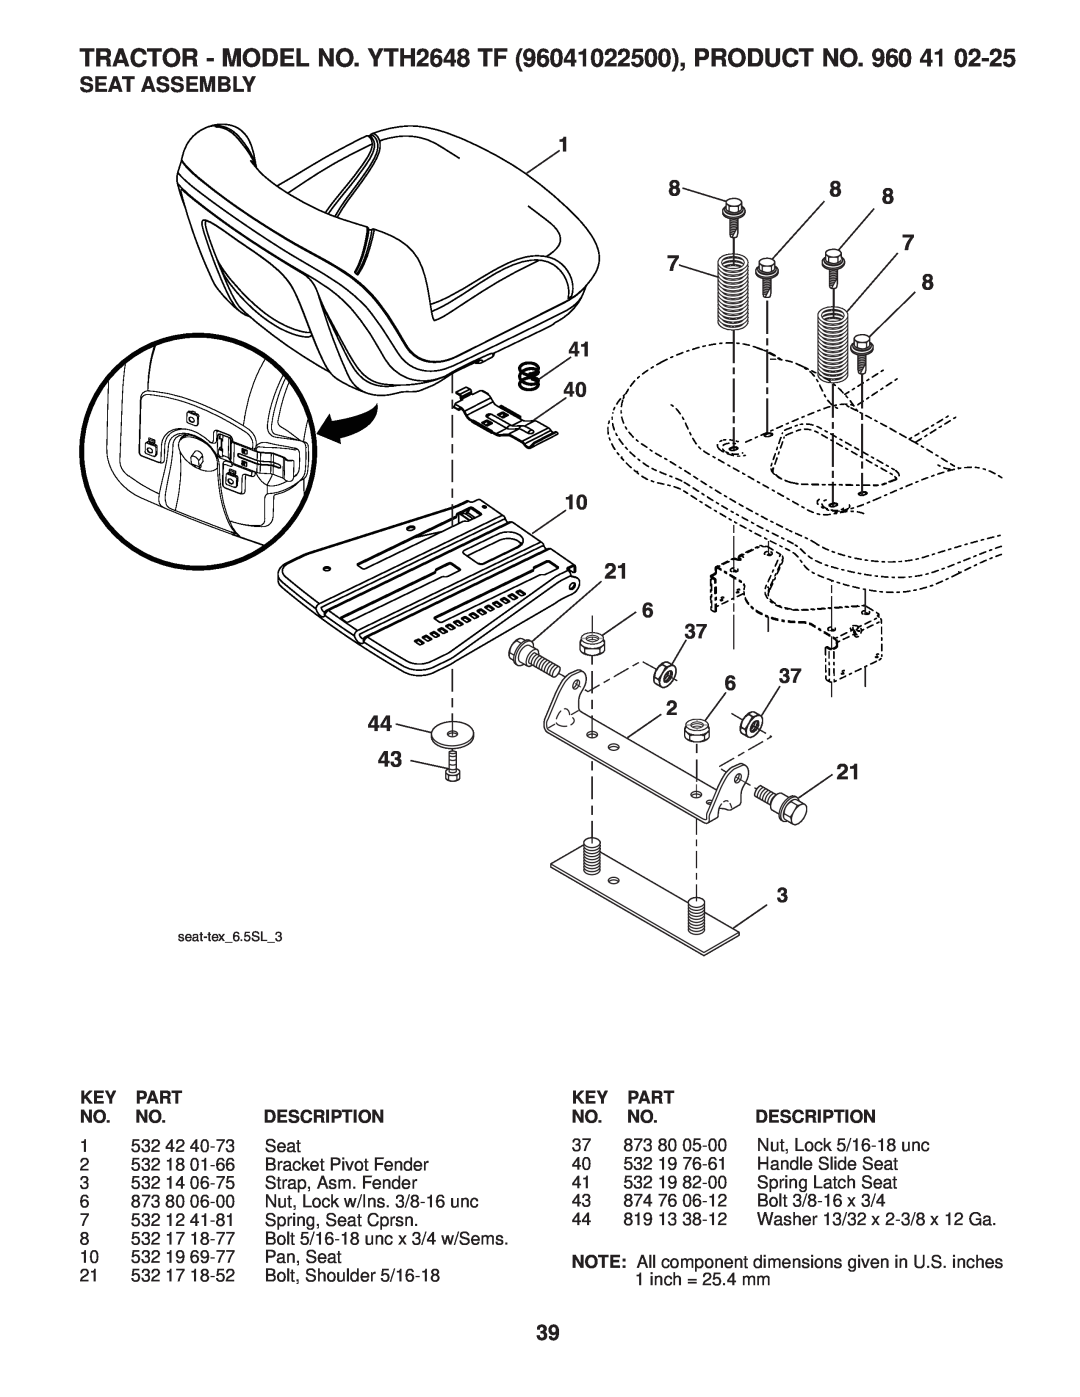 Husqvarna owner manual Seat Assembly, TRACTOR - MODEL NO. YTH2648 TF 96041022500, PRODUCT NO, Part, Description, 532 